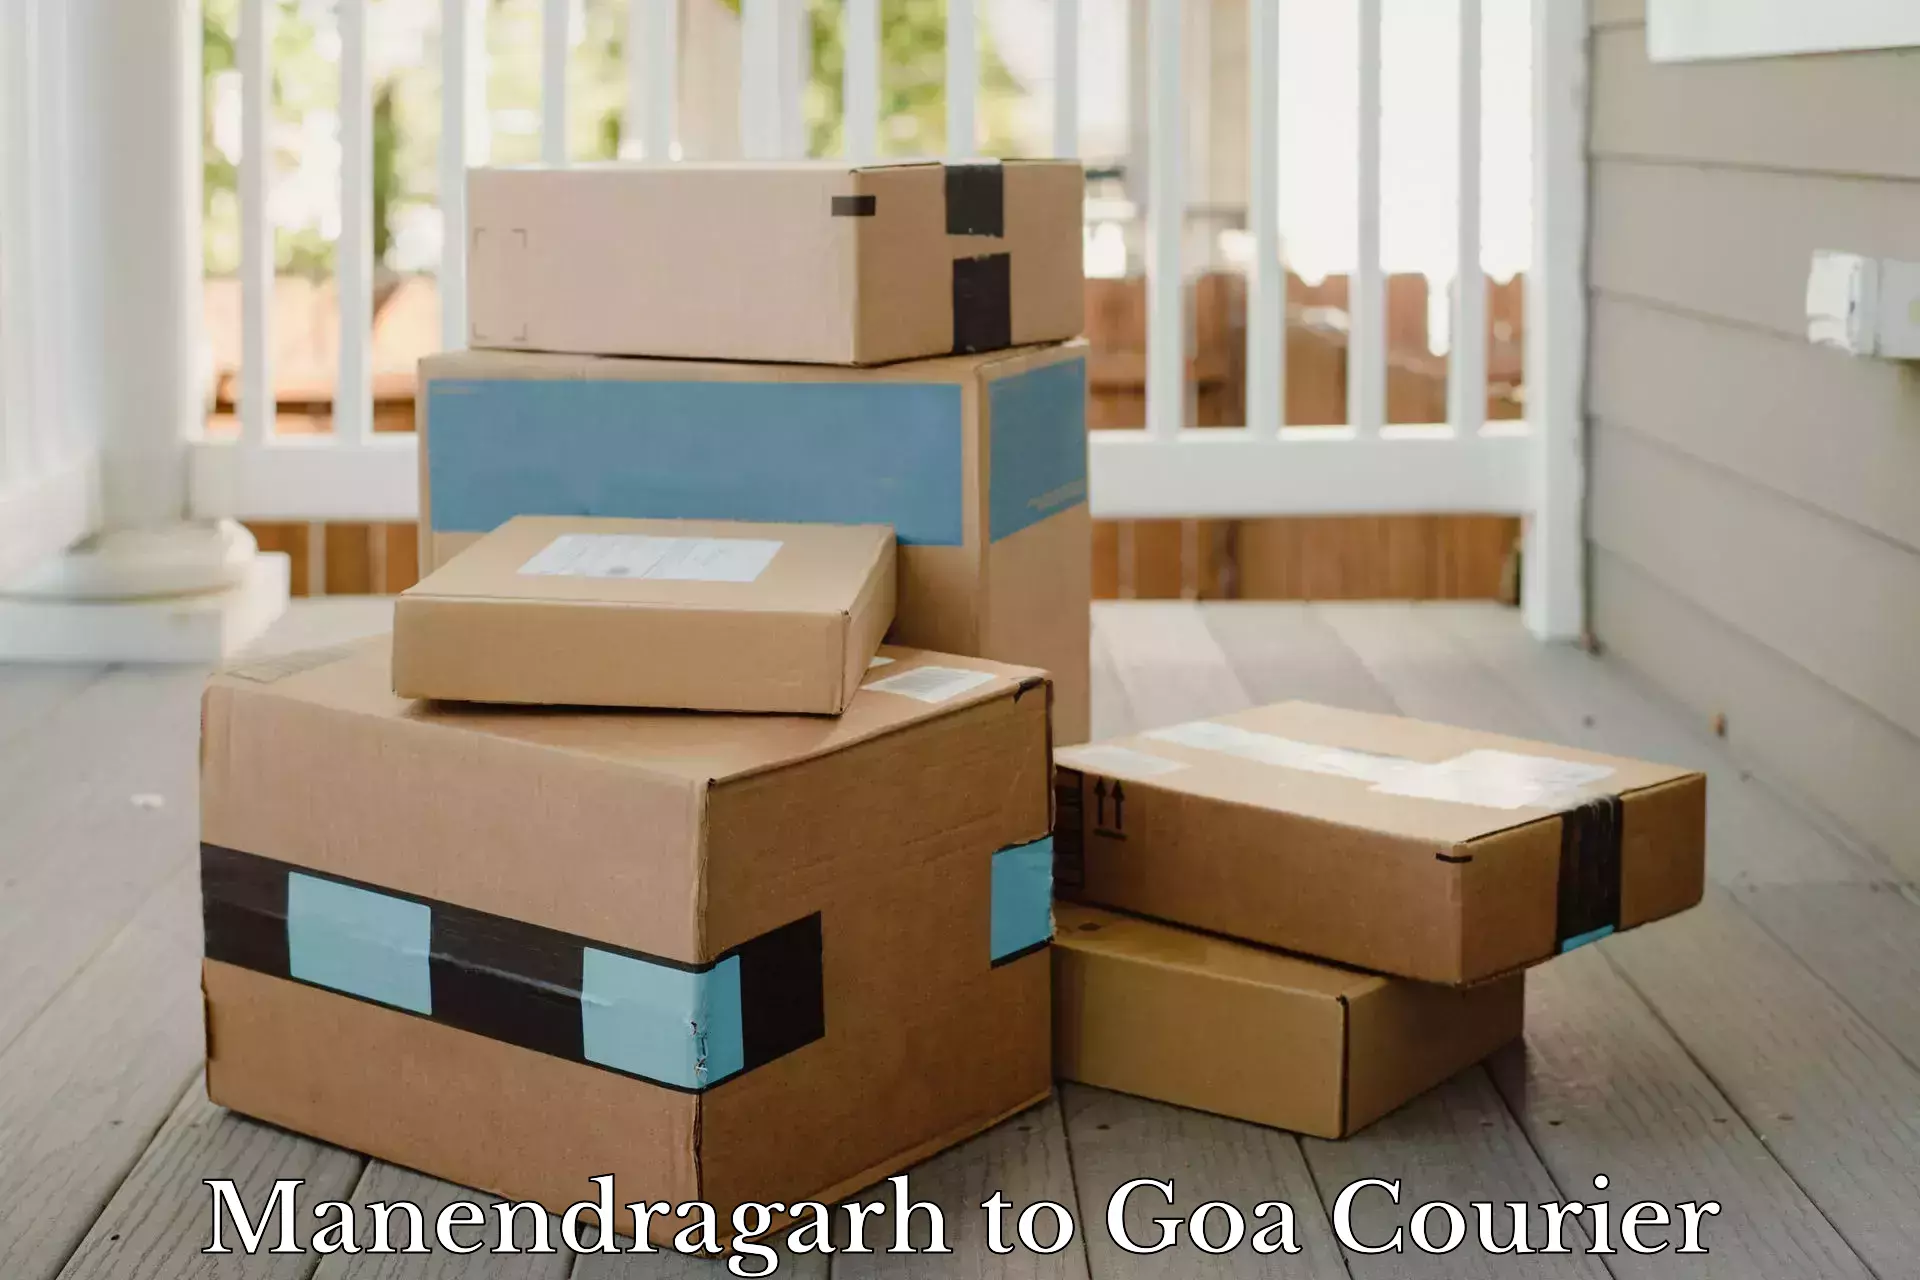 Automated shipping processes Manendragarh to Bardez